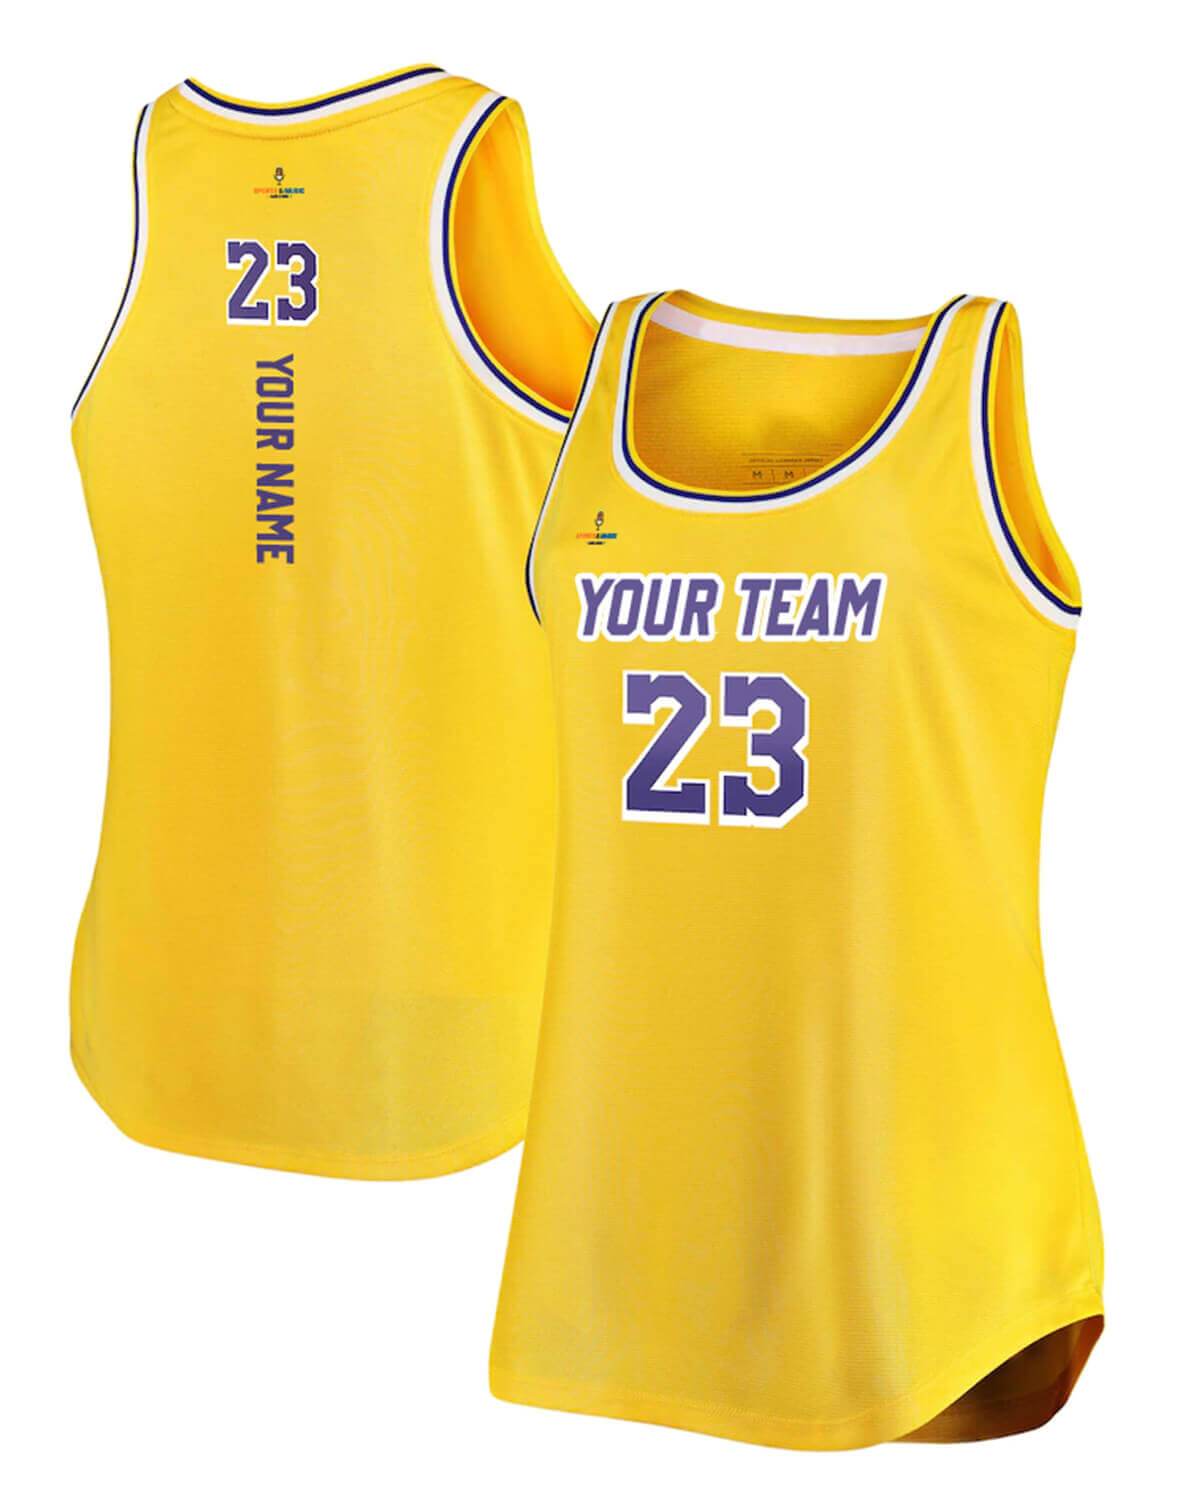 lakers jersey design 2021